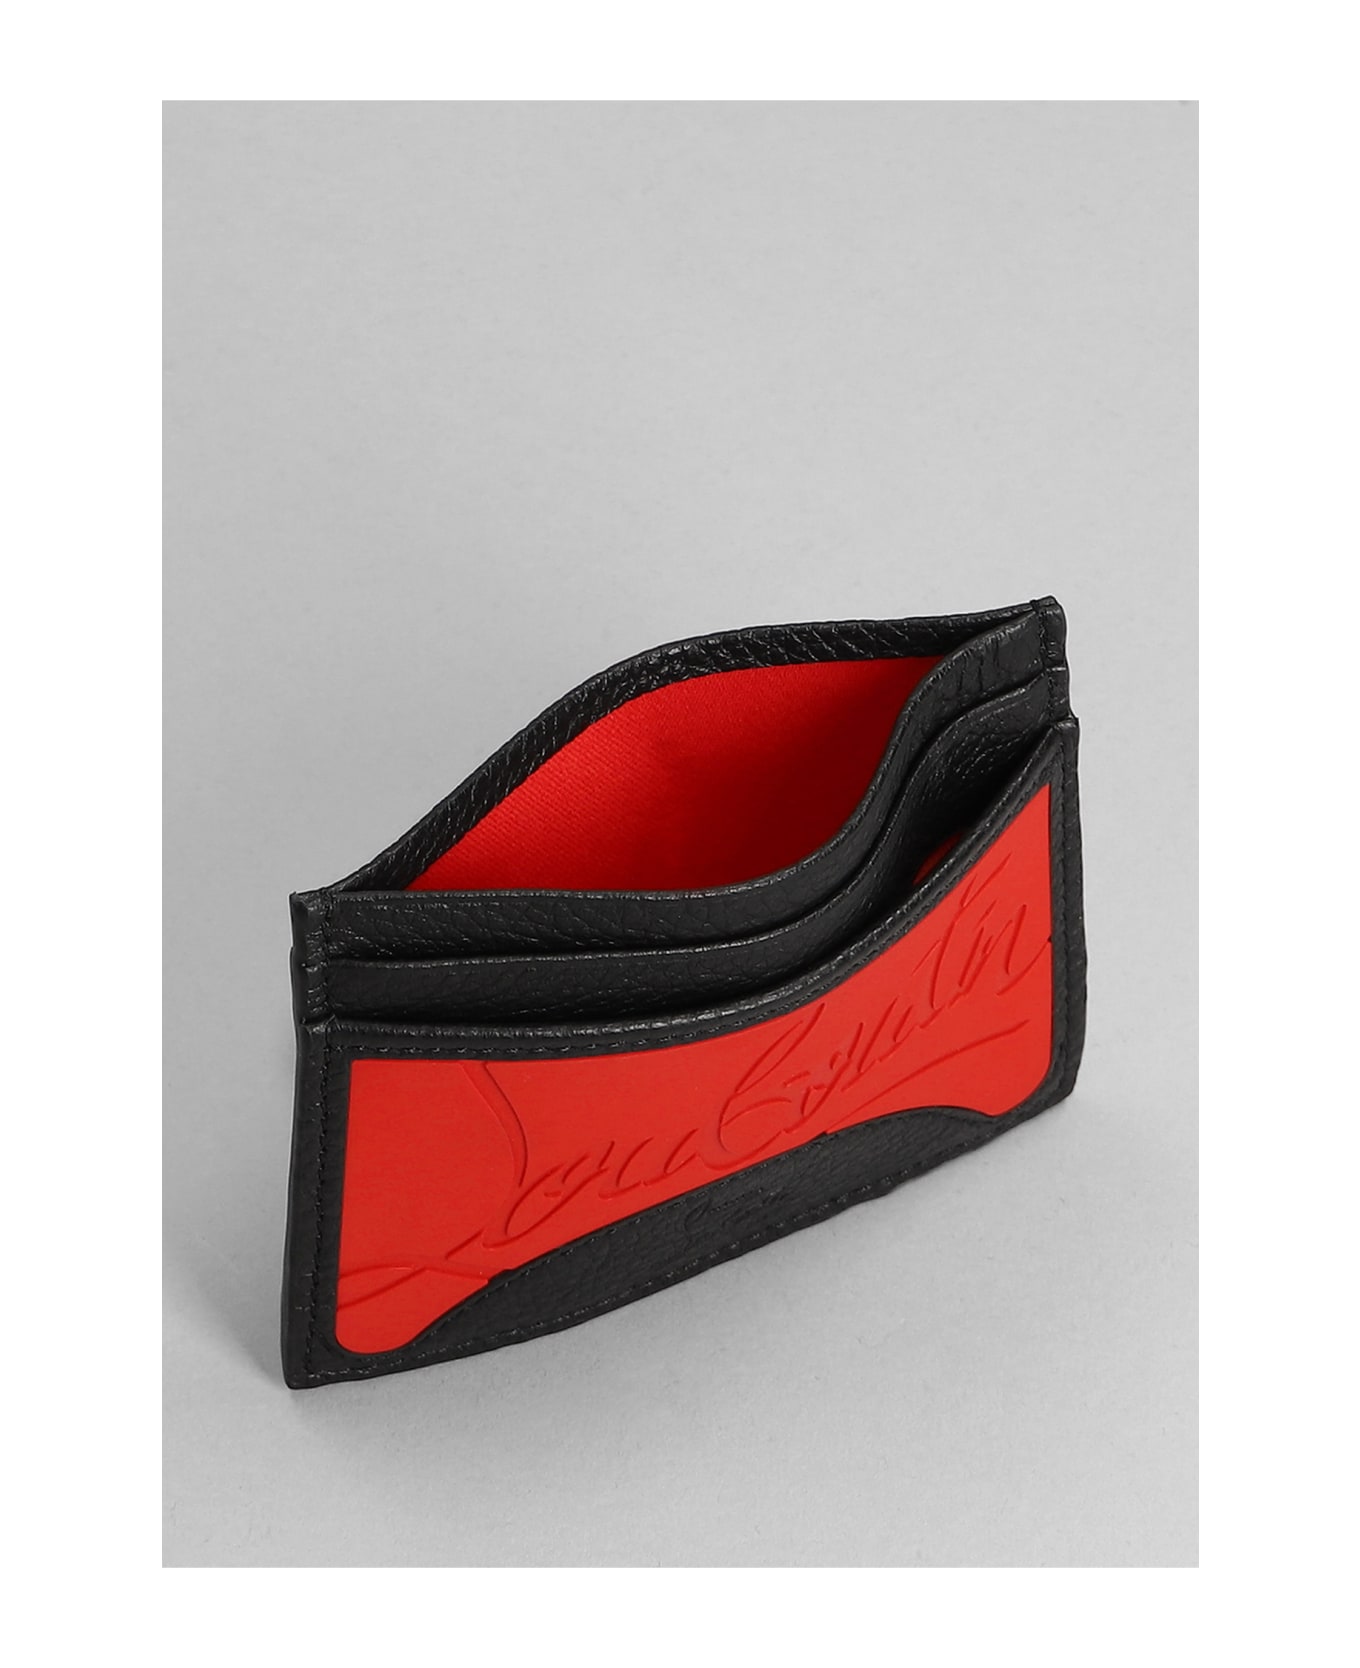 Christian Louboutin Wallet In Red Leather - Loubi/black